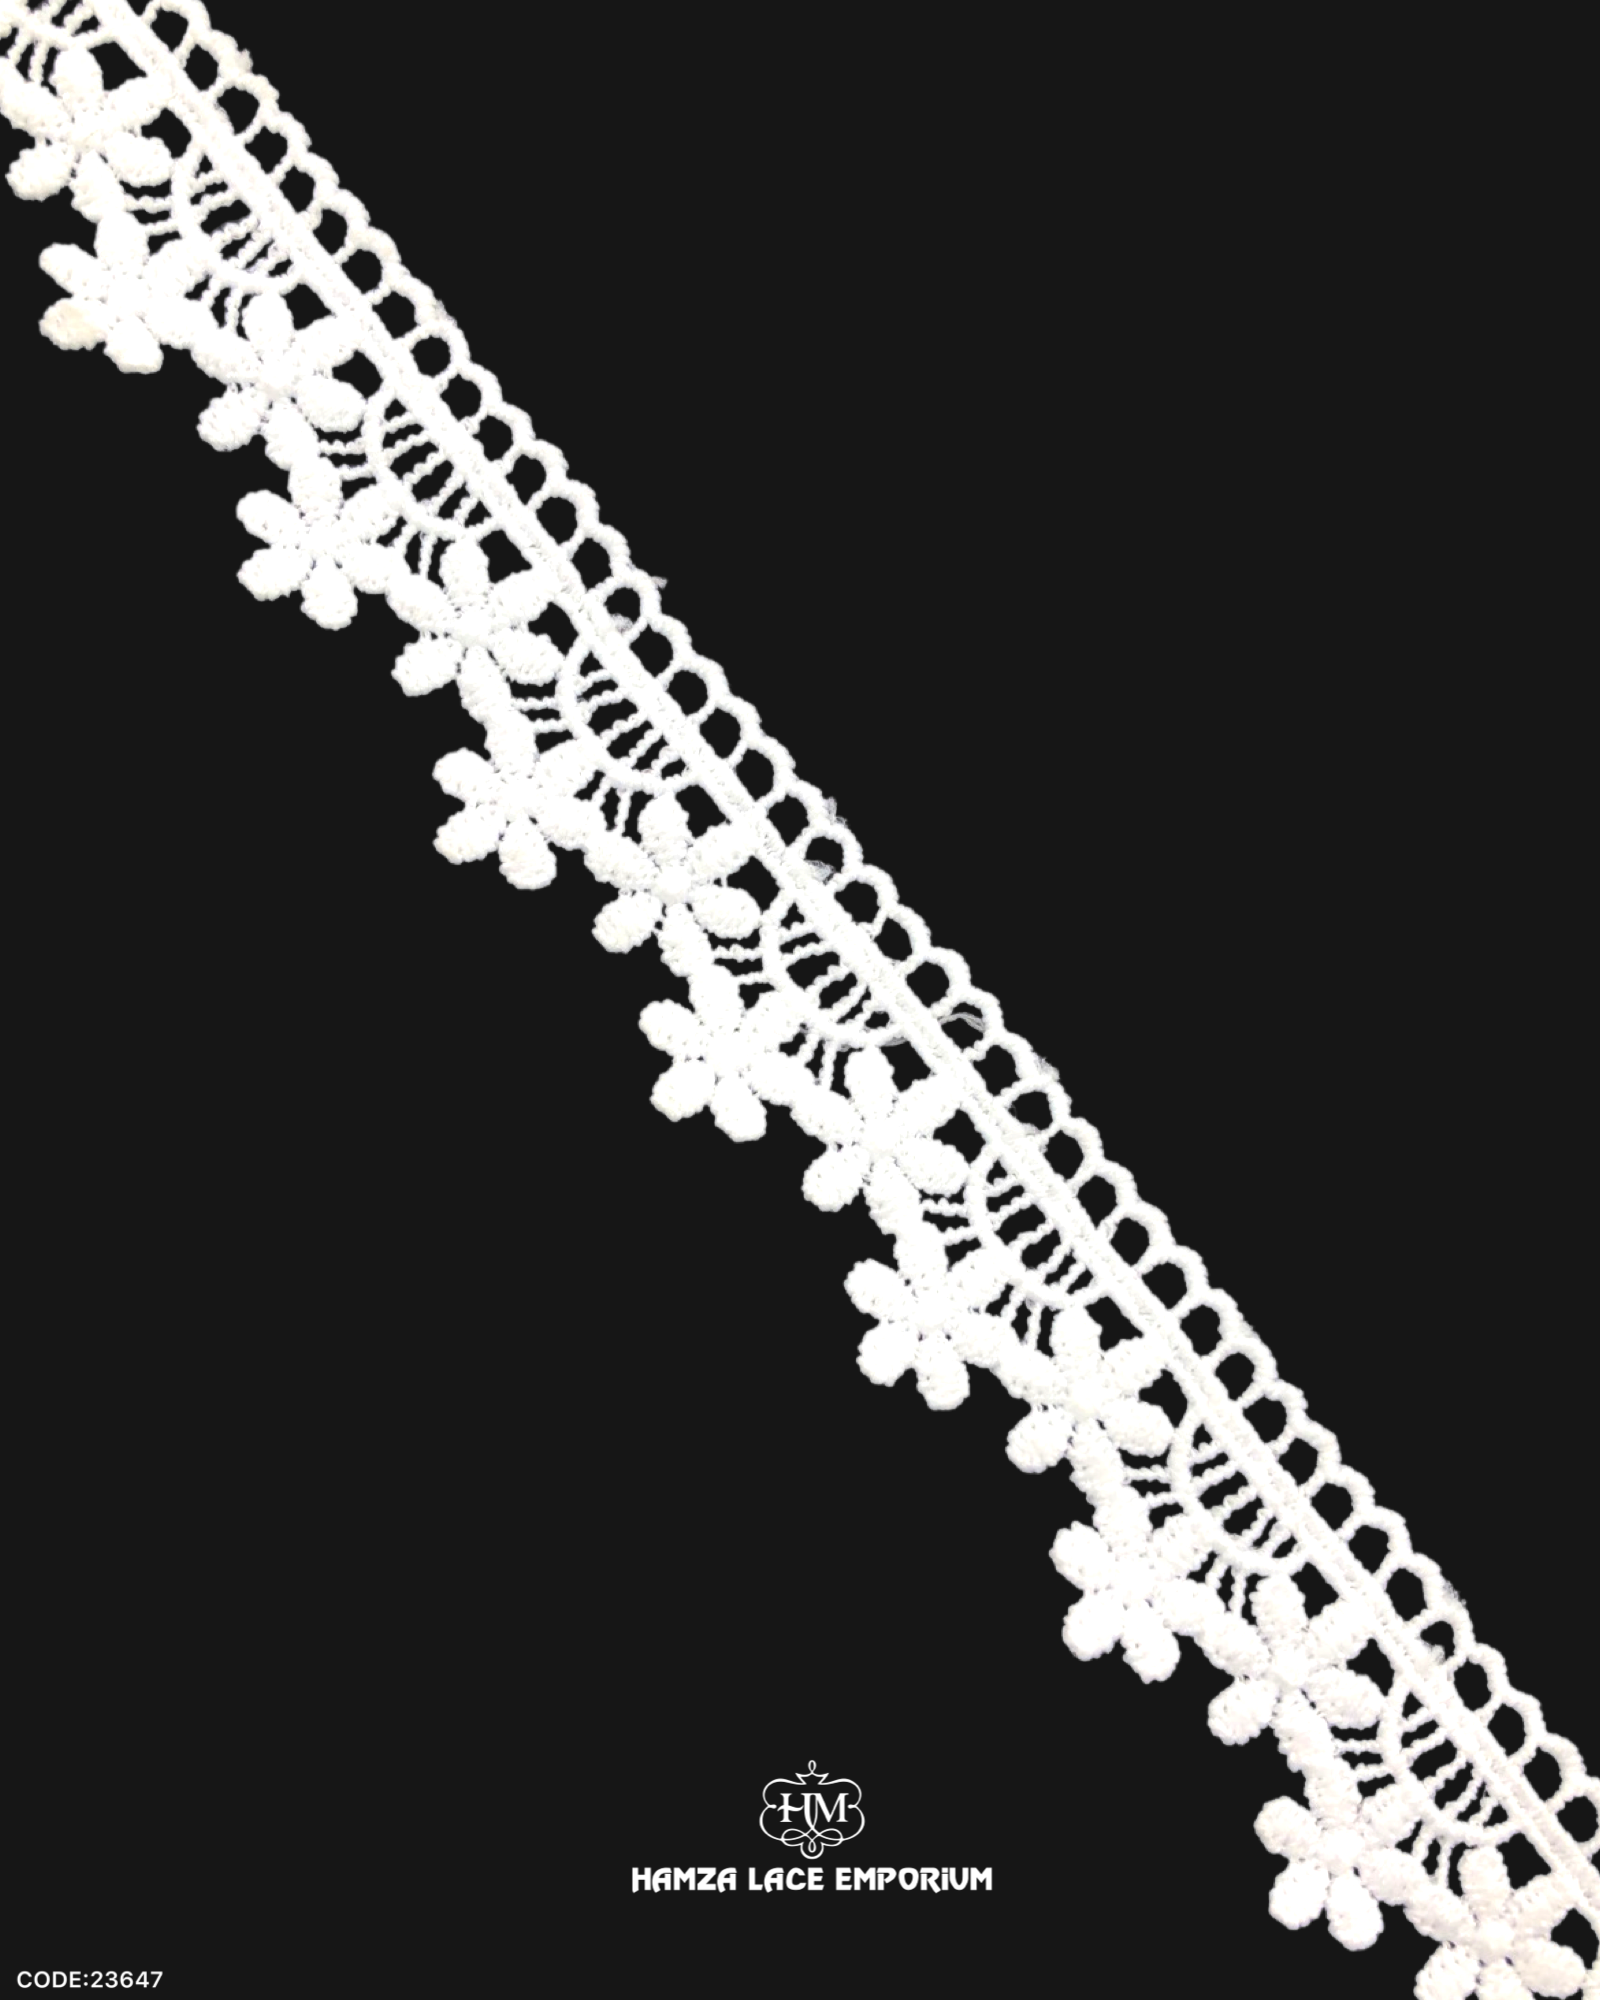 A piece of 'Edging Flower Lace 23647' on a black background and the brand name 'Hamza Lace' and logo is printed at the bottom